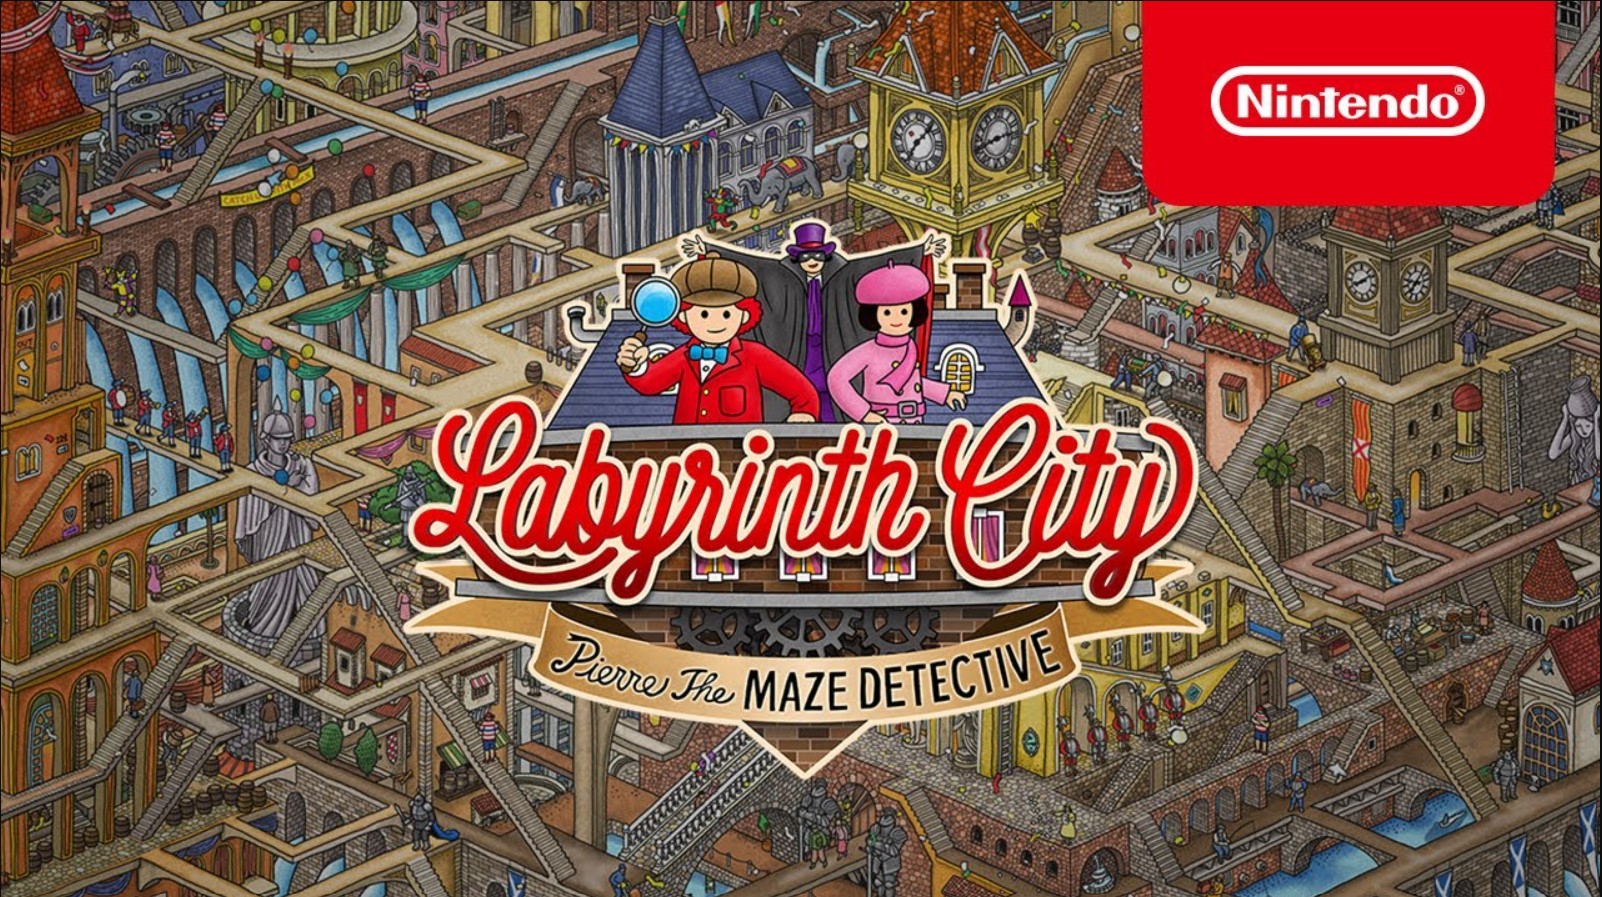 Labyrinth City Pierre the Maze Detective PS4 Version Full Game Free Download